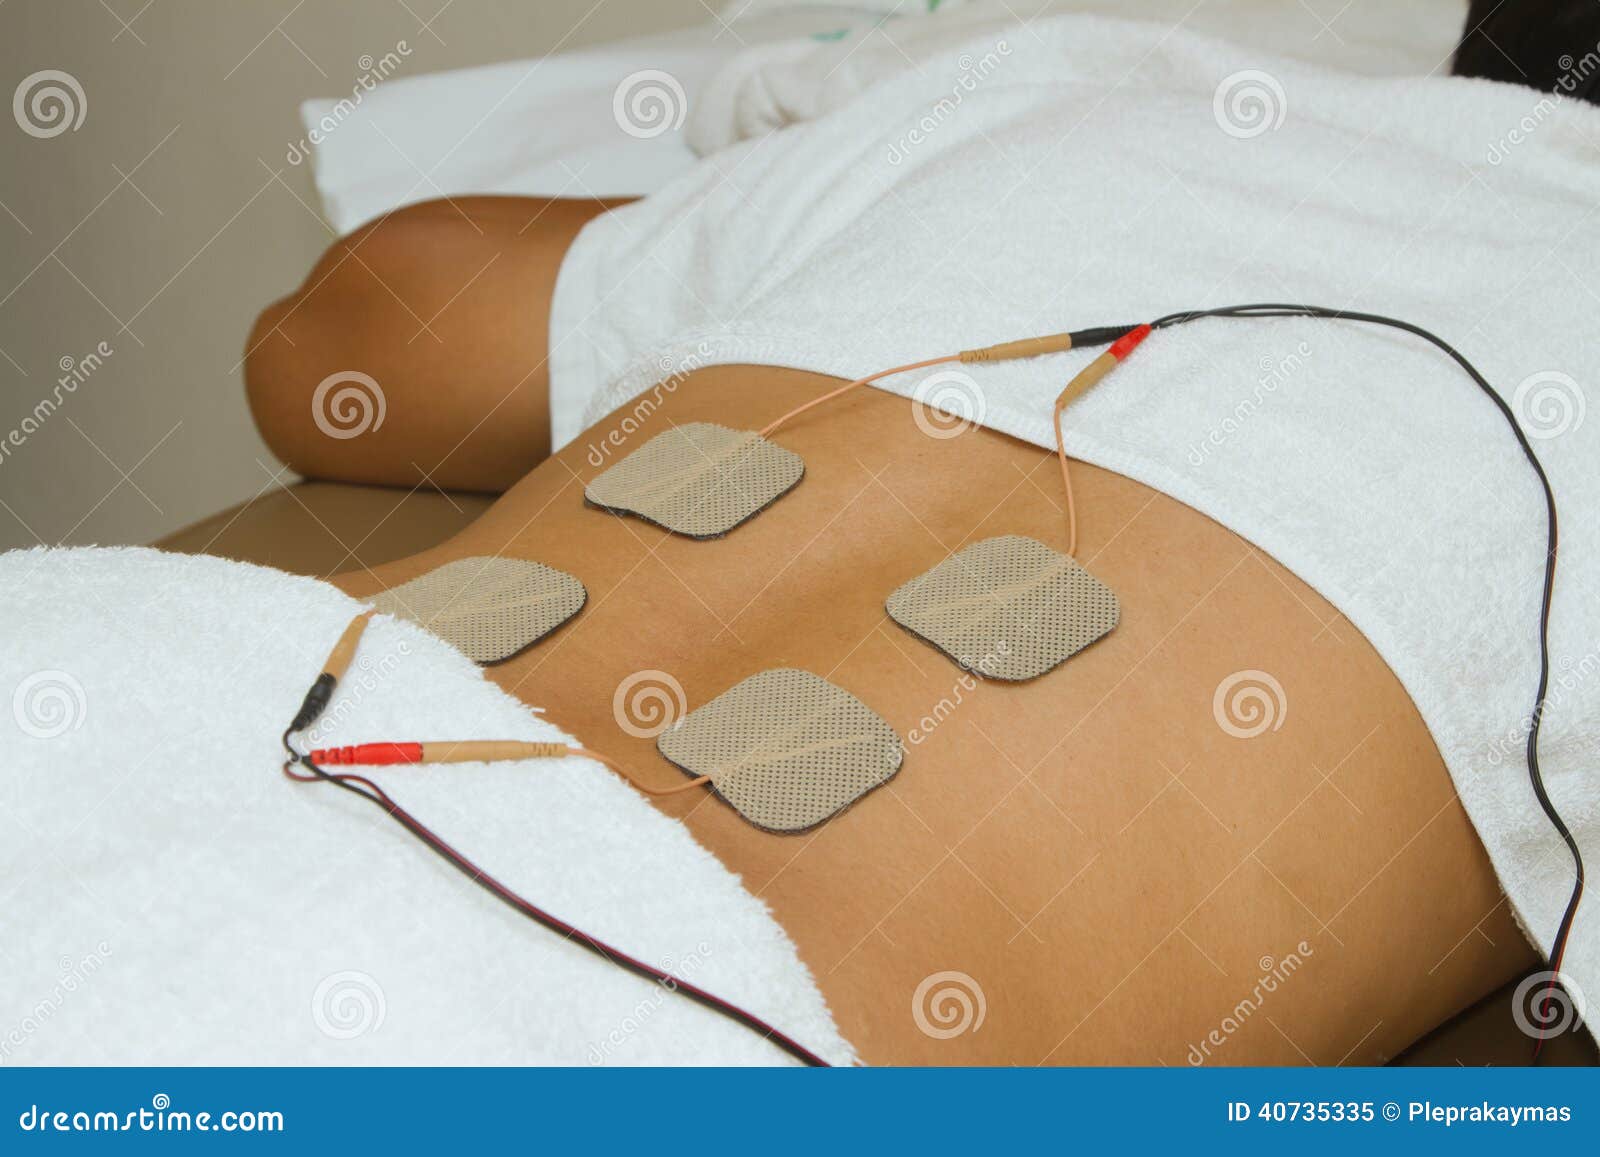 patient applying electrical stimulation therapy ( tens )